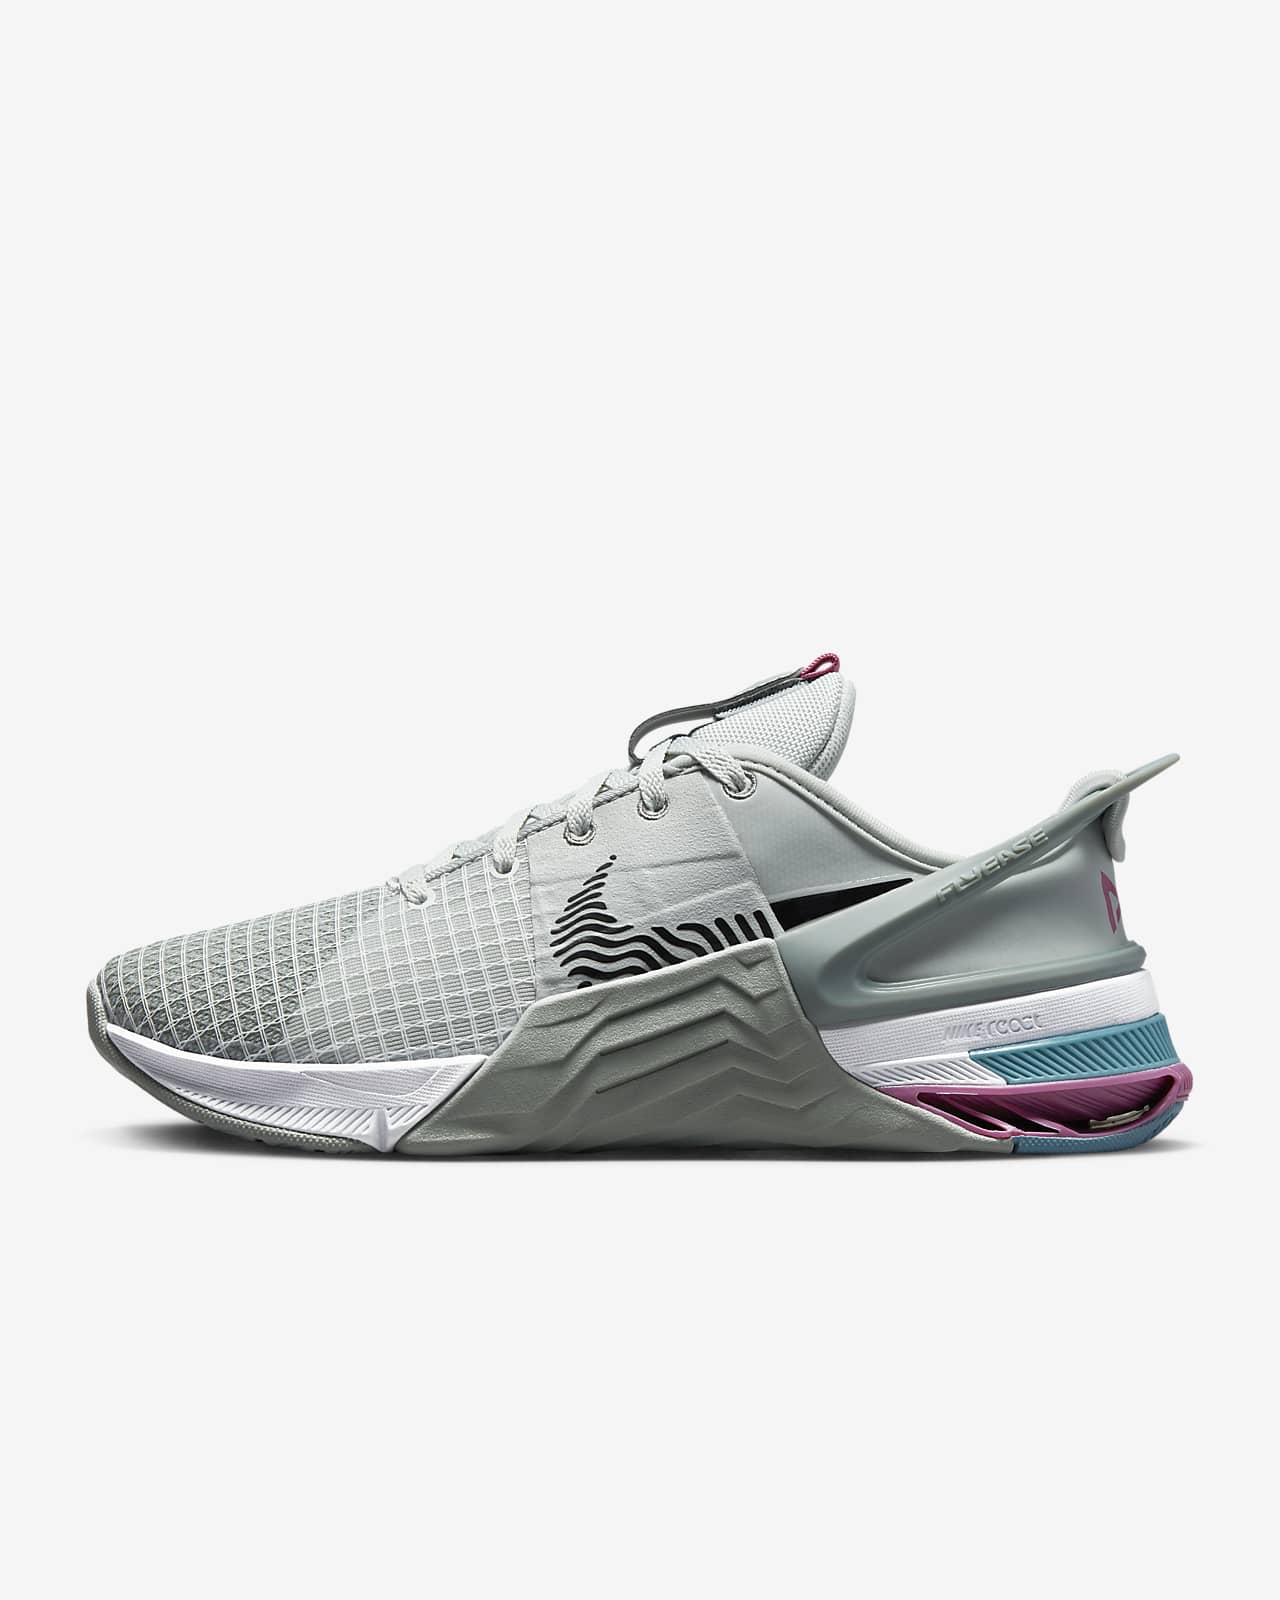 Nike Metcon FlyEase Women's Easy On/Off Training Shoes.